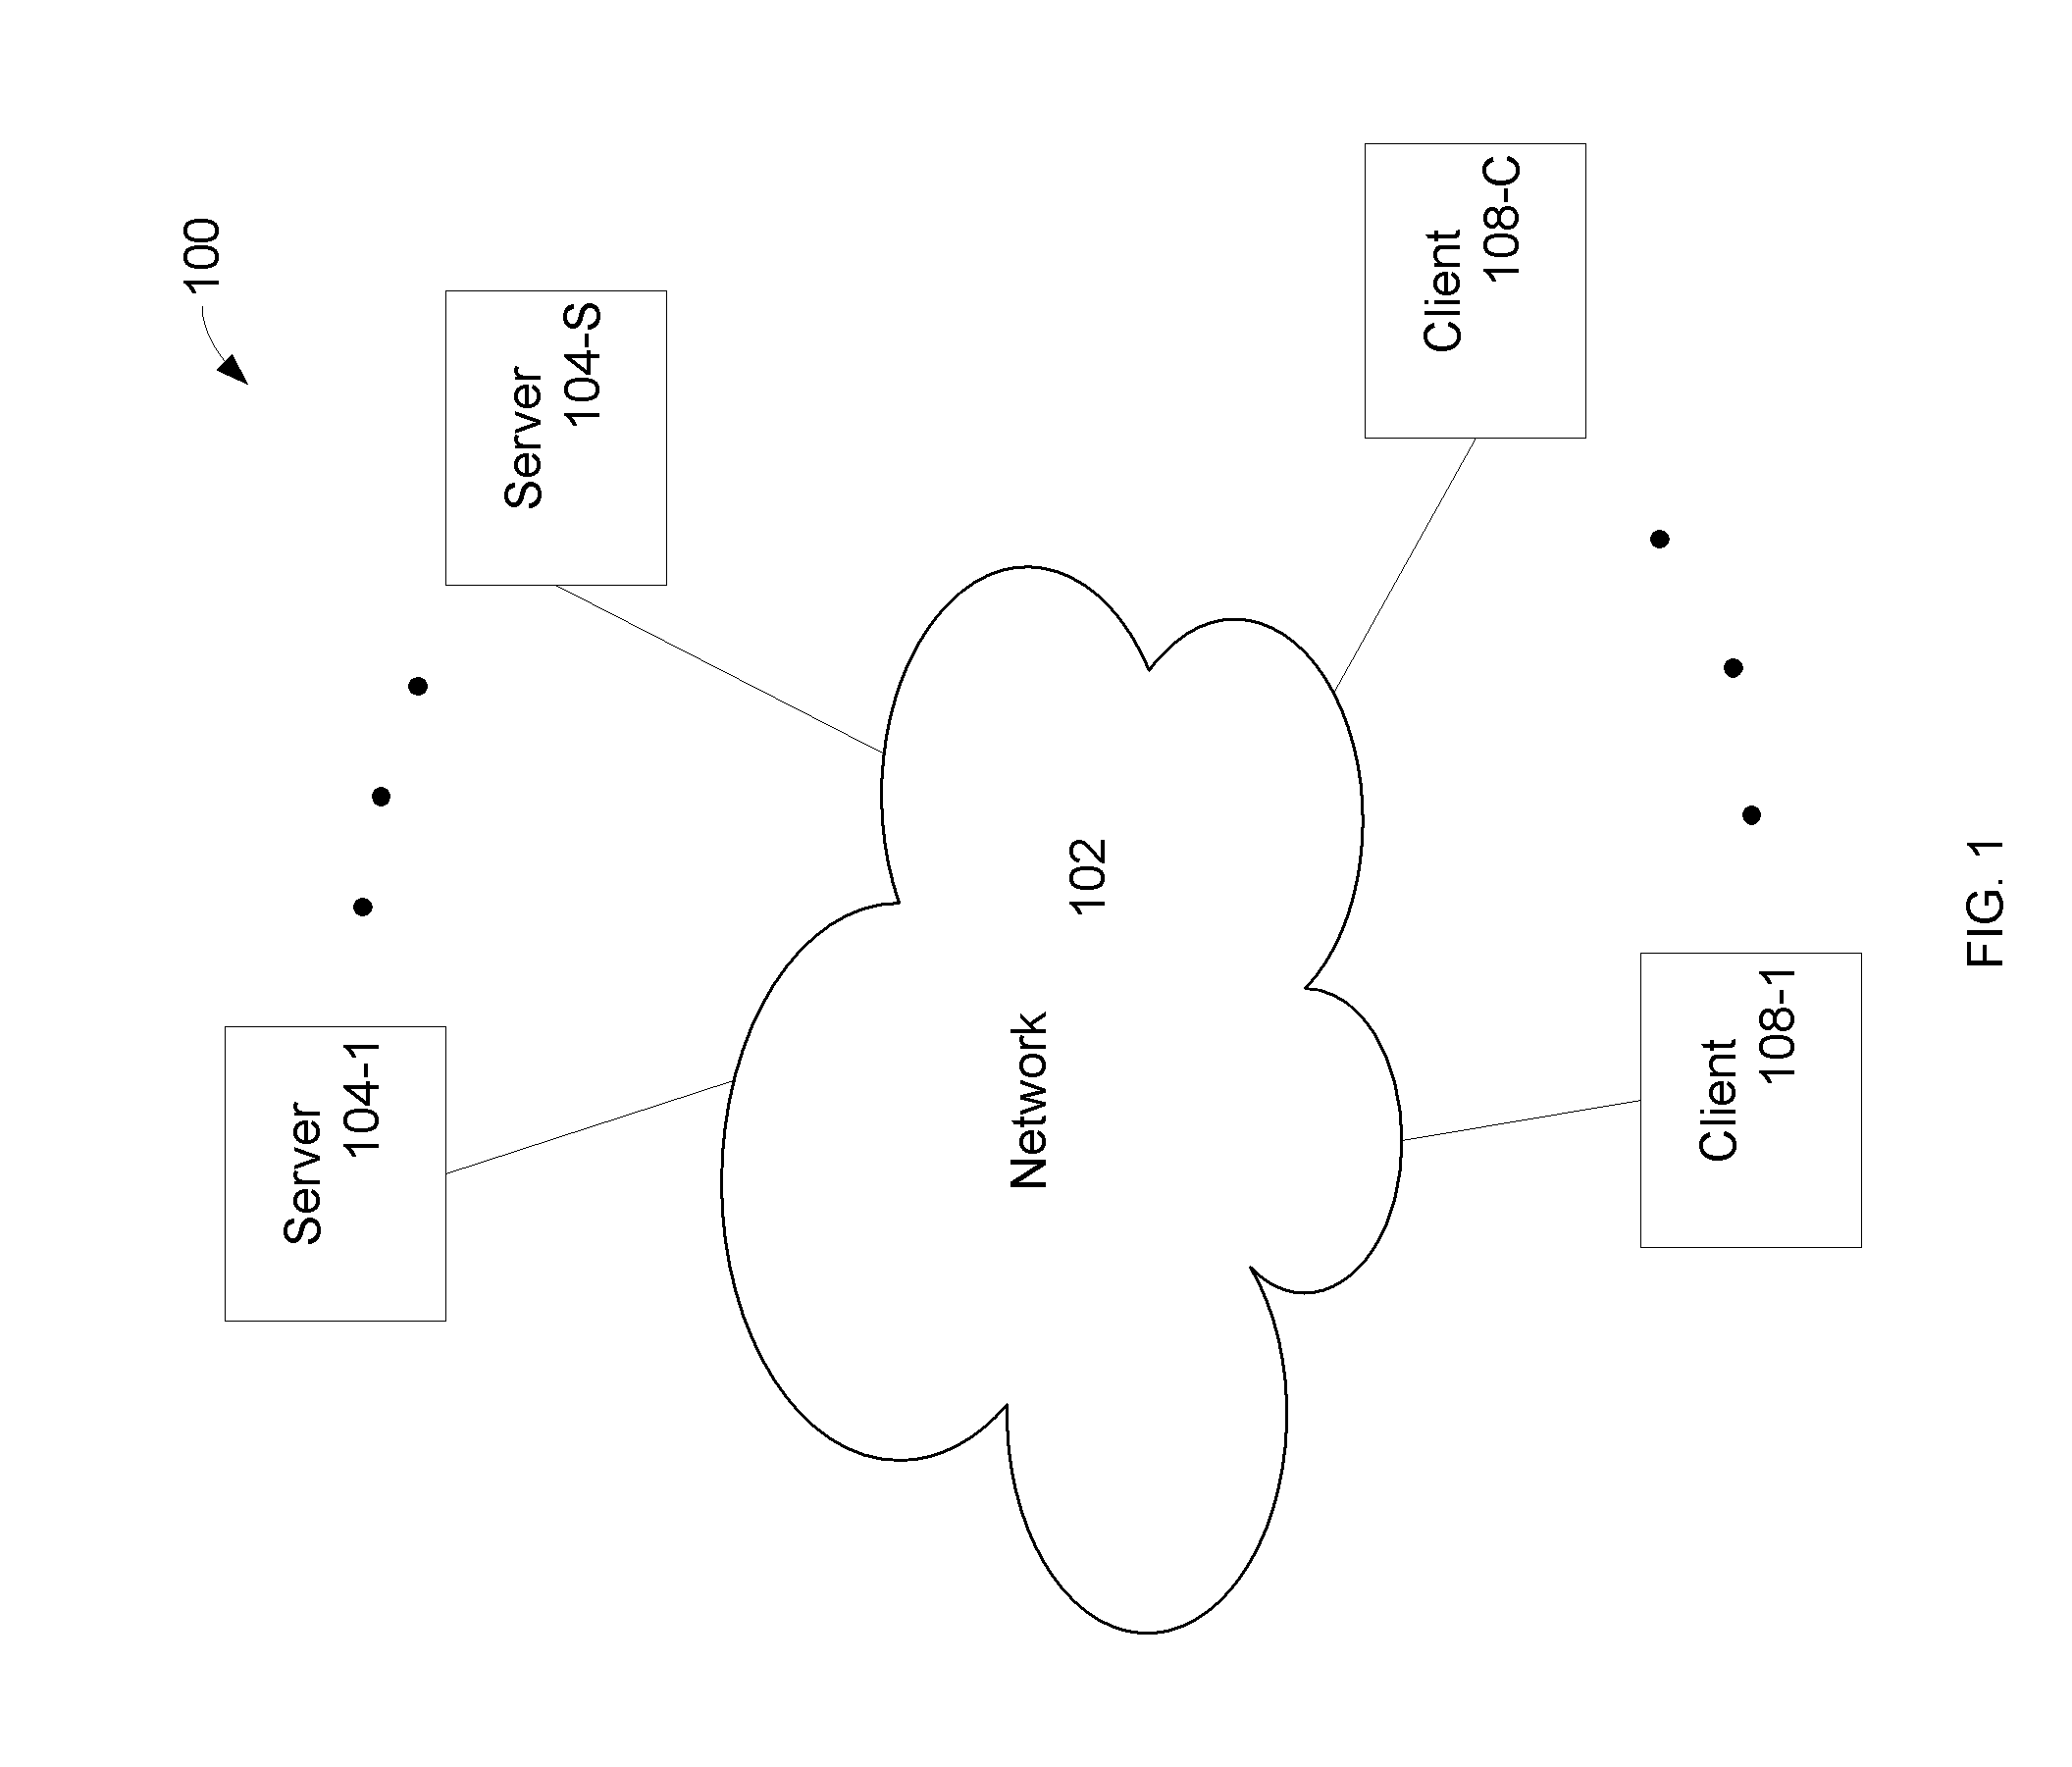 Method and Apparatus for Campaign and Inventory Optimization